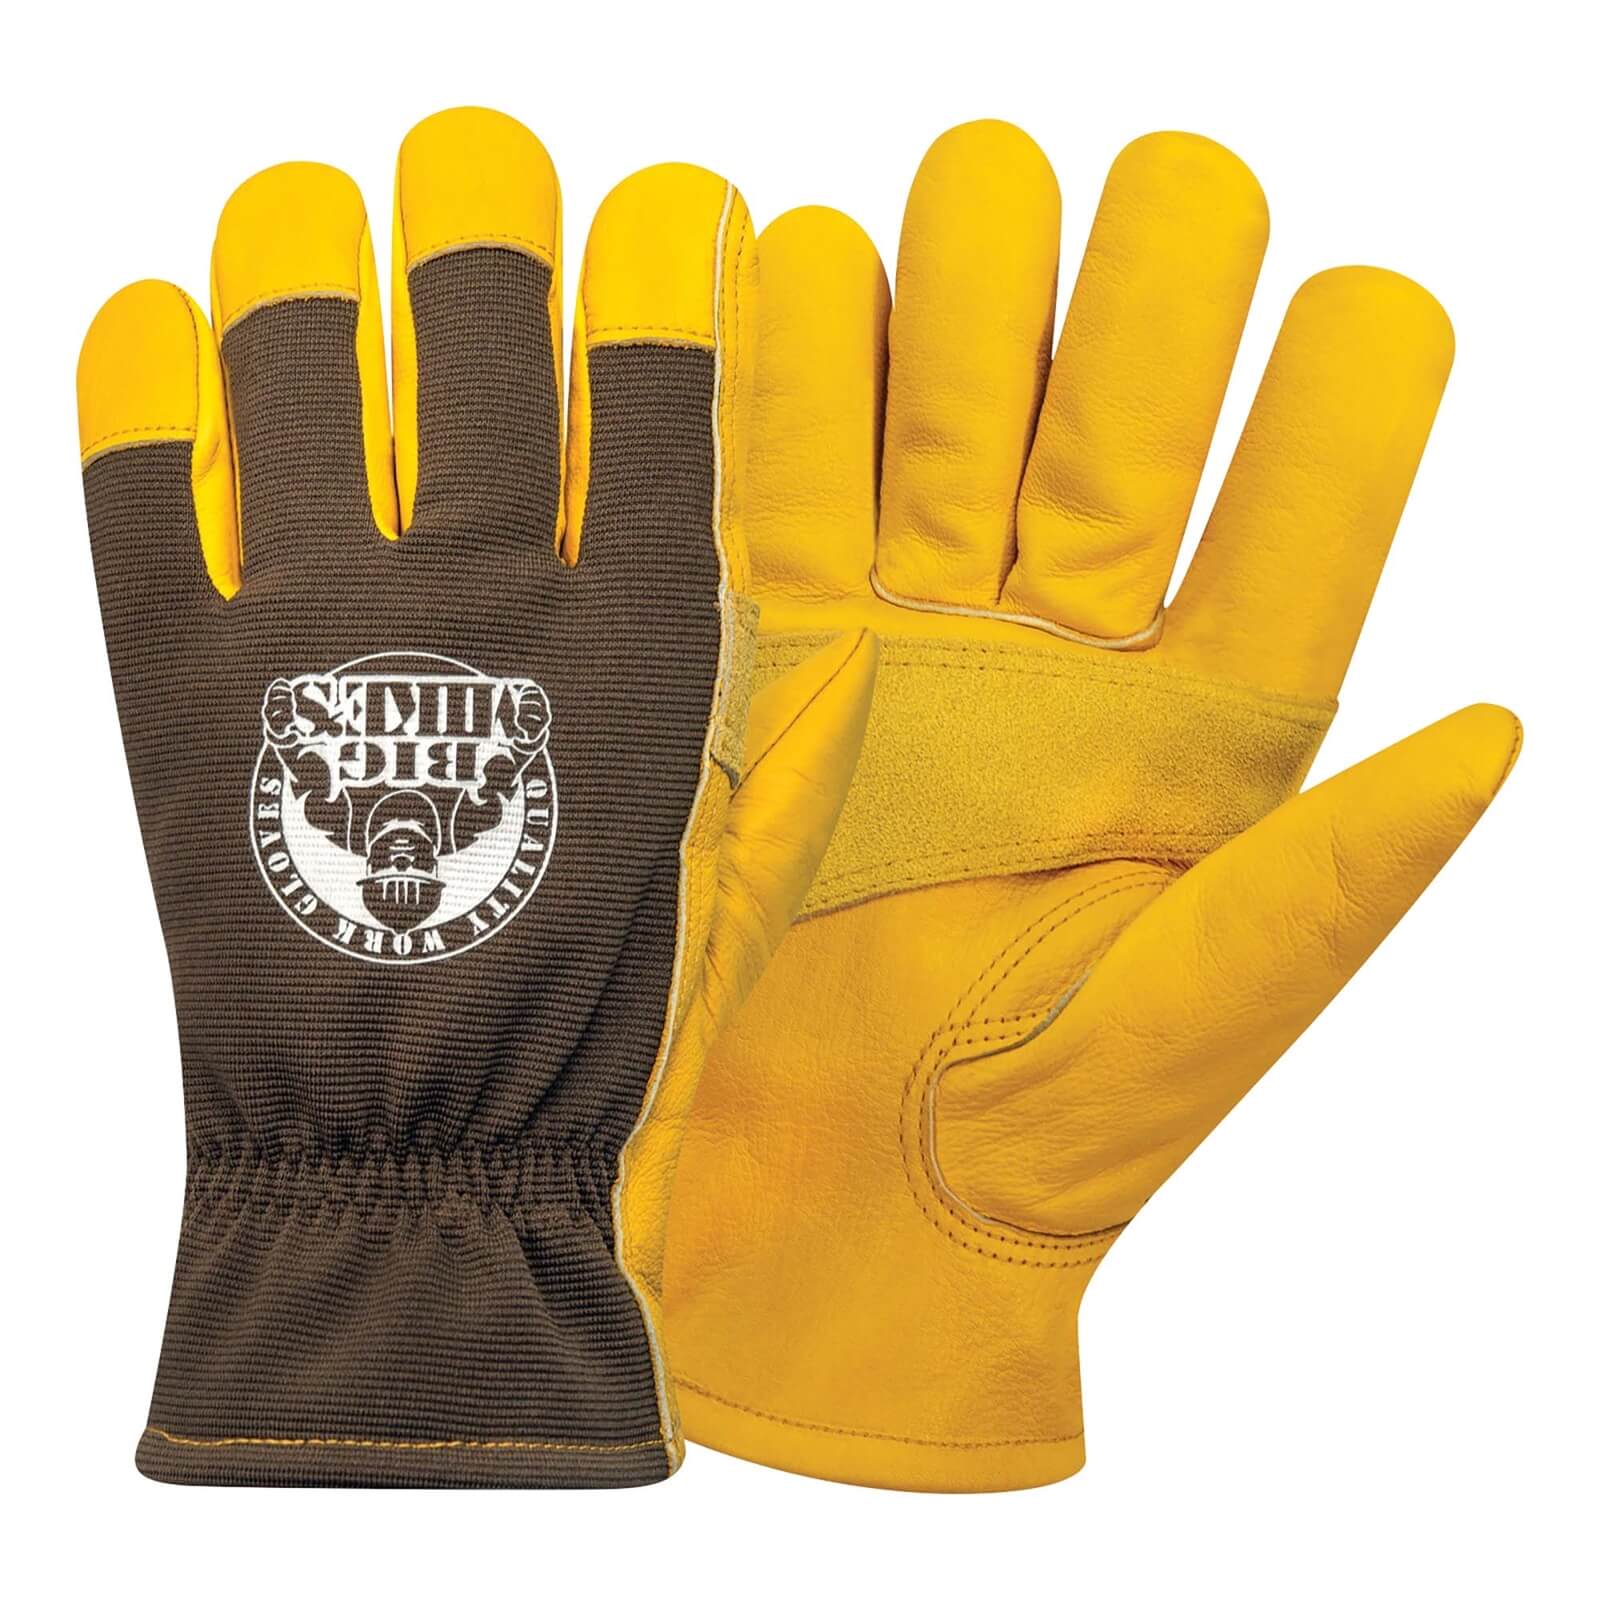 Big Mike's Leather Lined Winter Work Gloves - Large